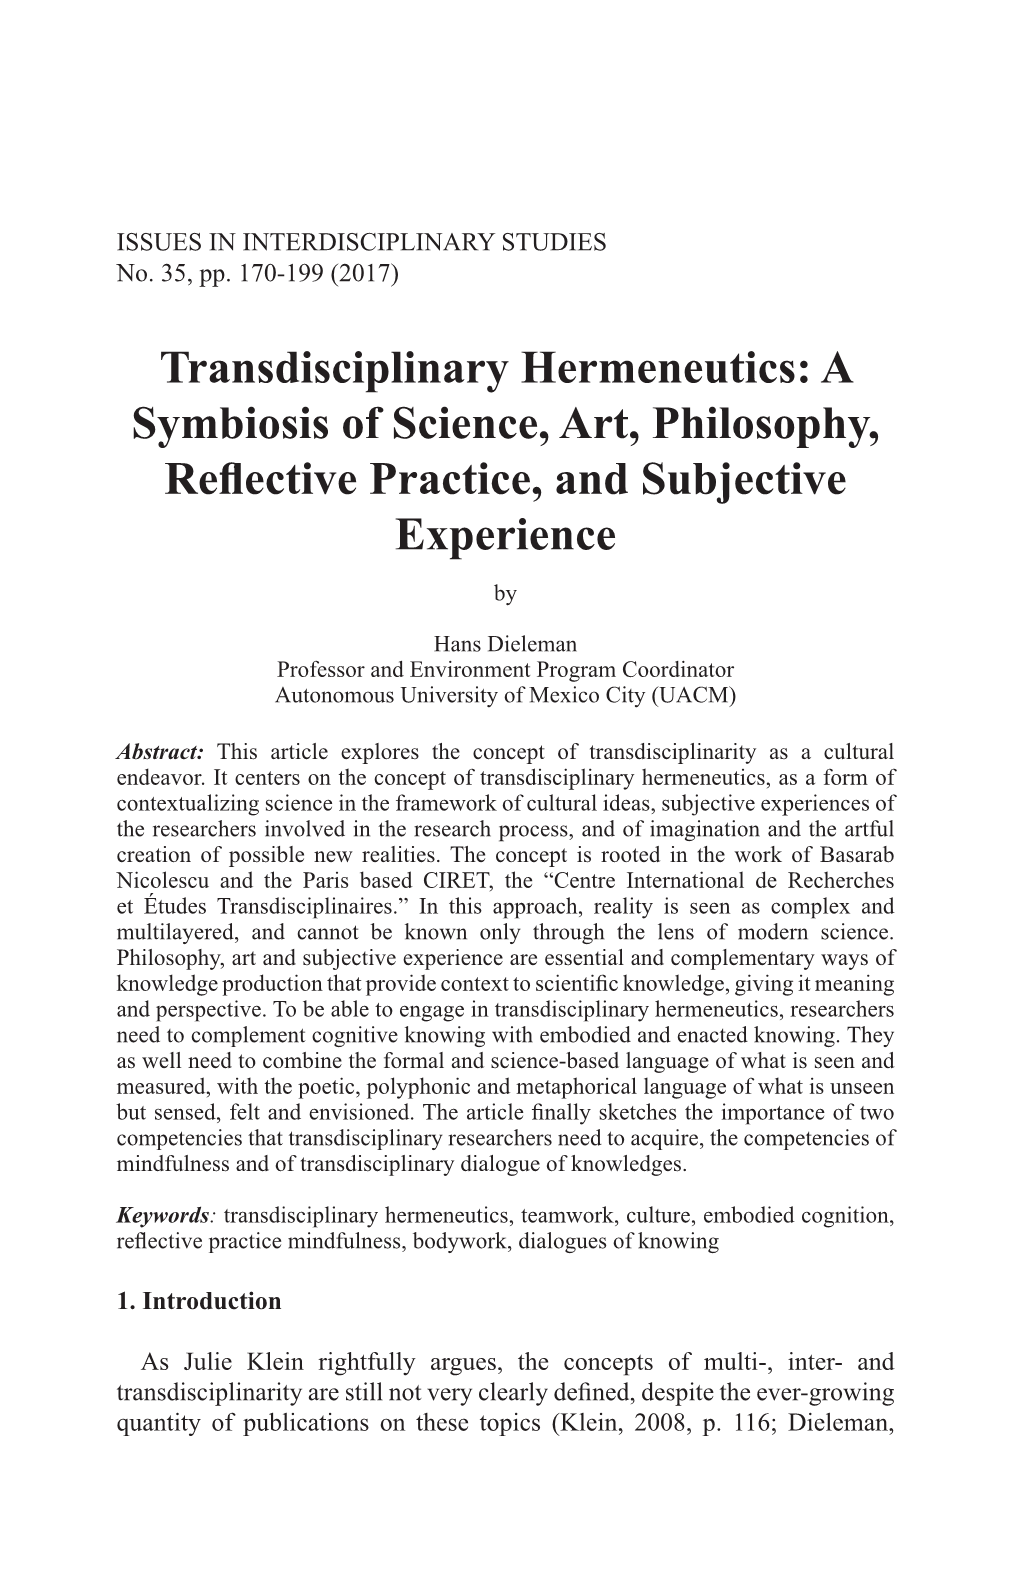 Transdisciplinary Hermeneutics: a Symbiosis of Science, Art, Philosophy, Refective Practice, and Subjective Experience By